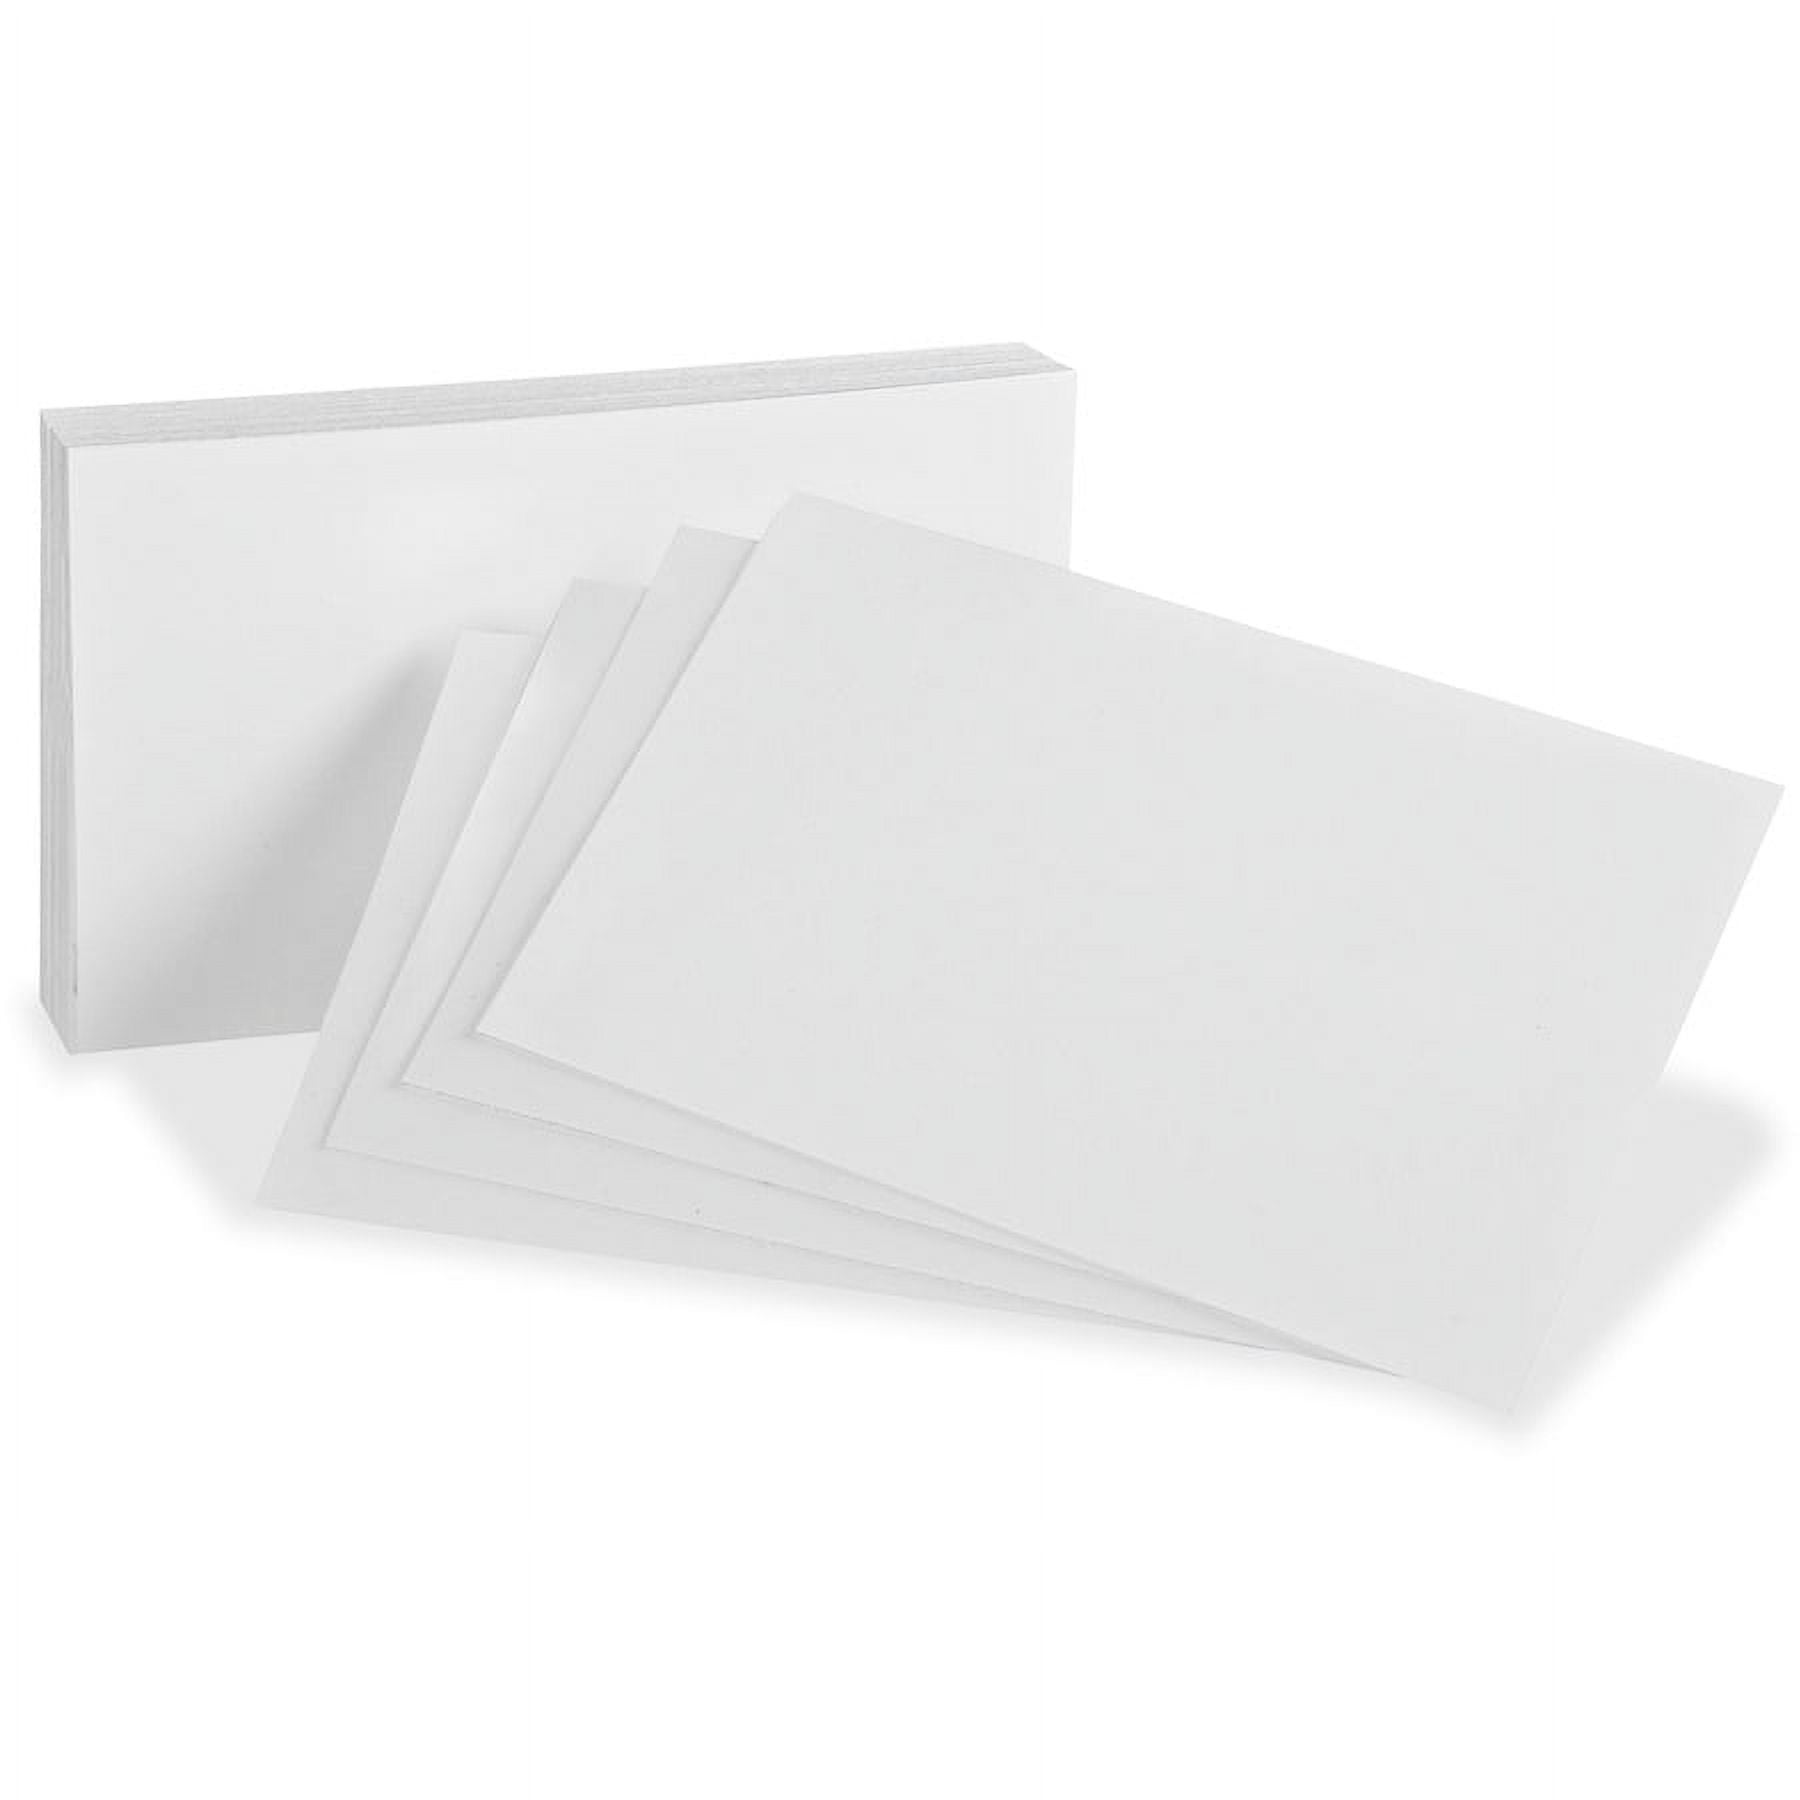 Oxford Blank Index Cards - Plain - 3 x 5 - White Paper - 300 / Pack